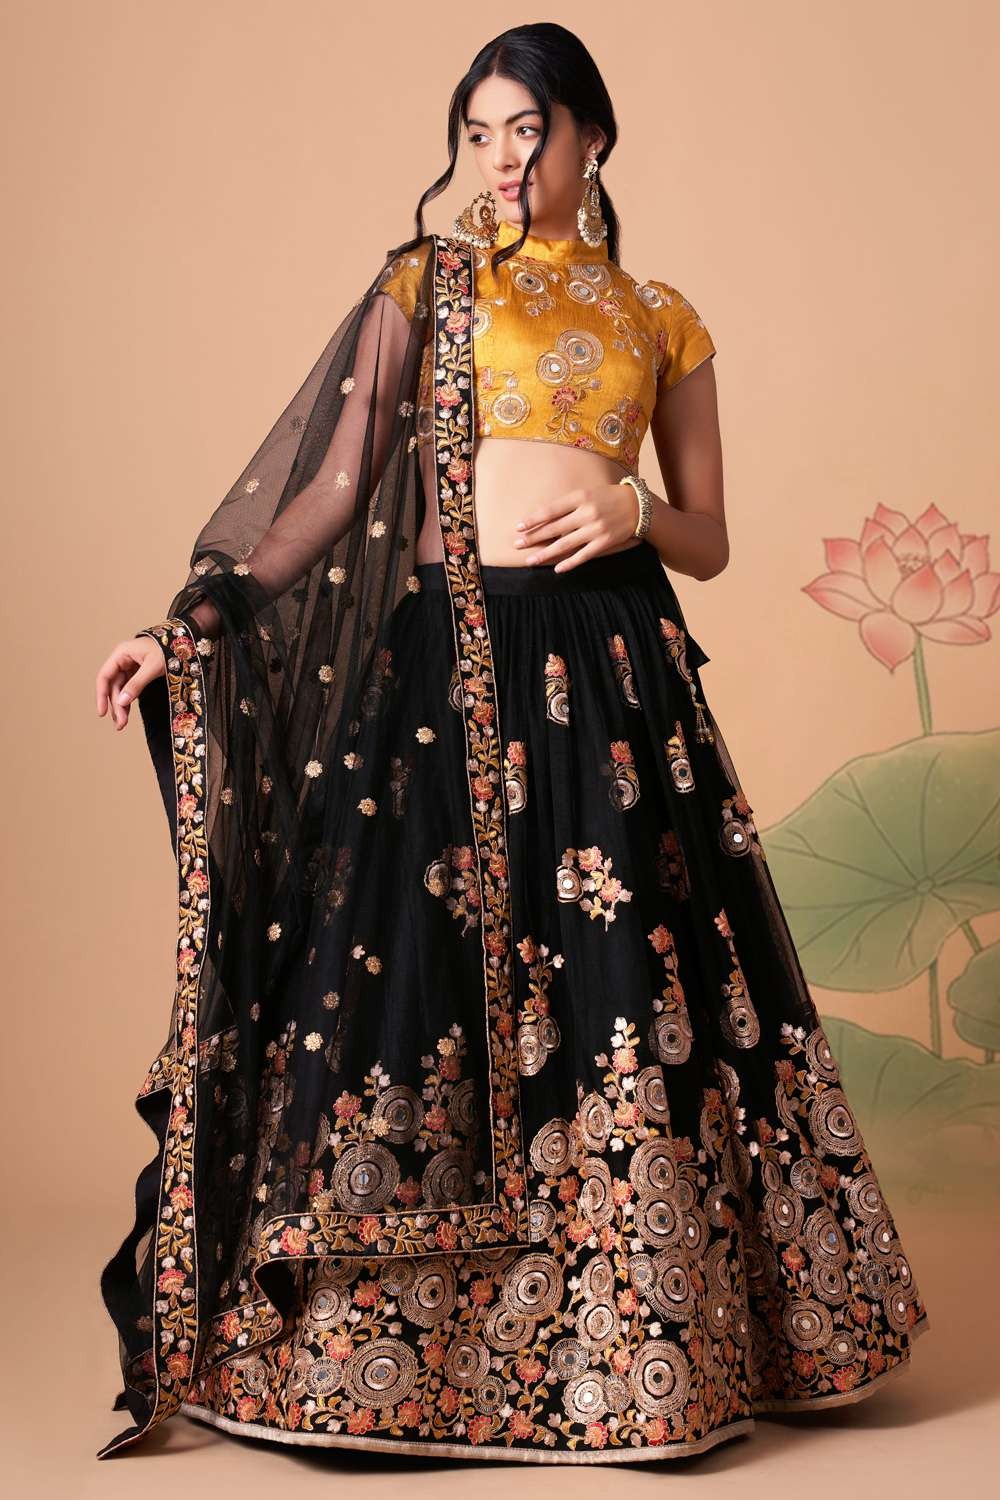 Buy Black & Golden Silk Skirt and Blouse Set for Women at Amazon.in